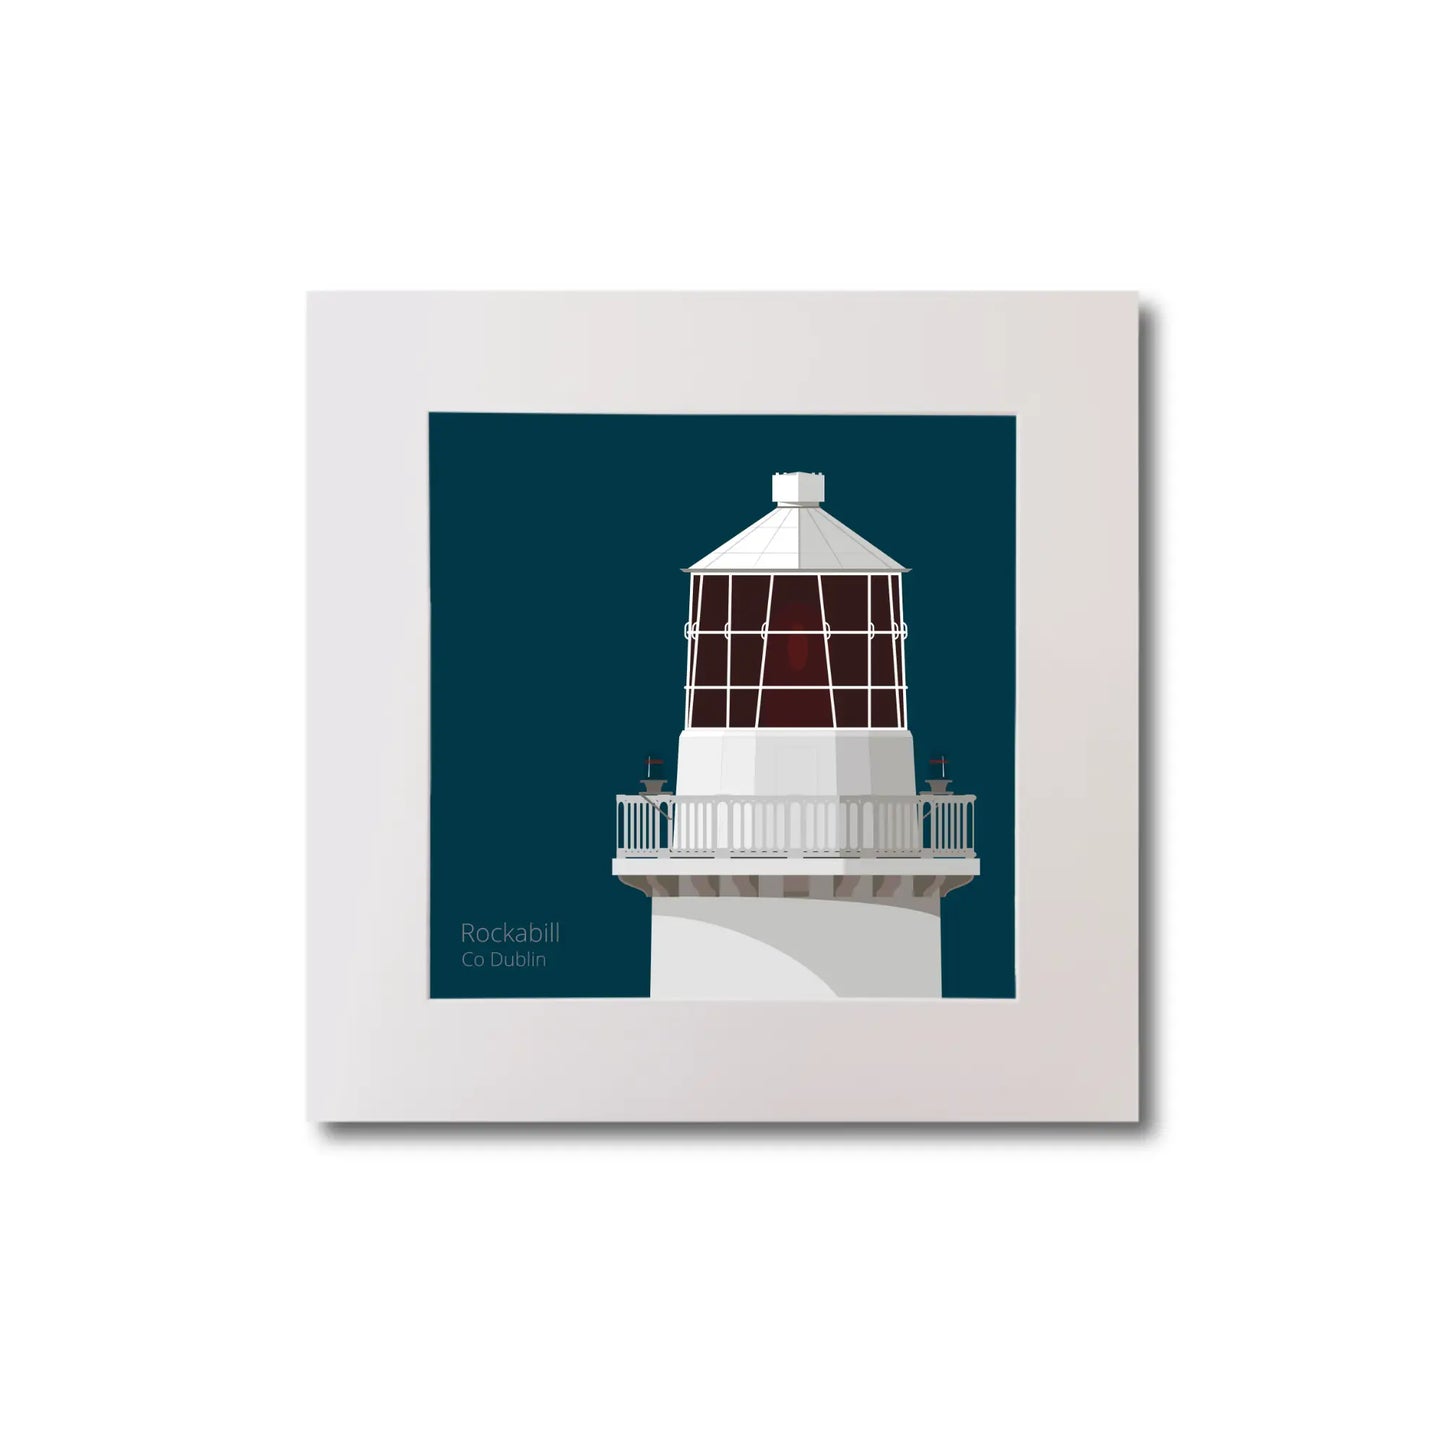 Illustration of Rockabill lighthouse on a midnight blue background, mounted and measuring 20x20cm.